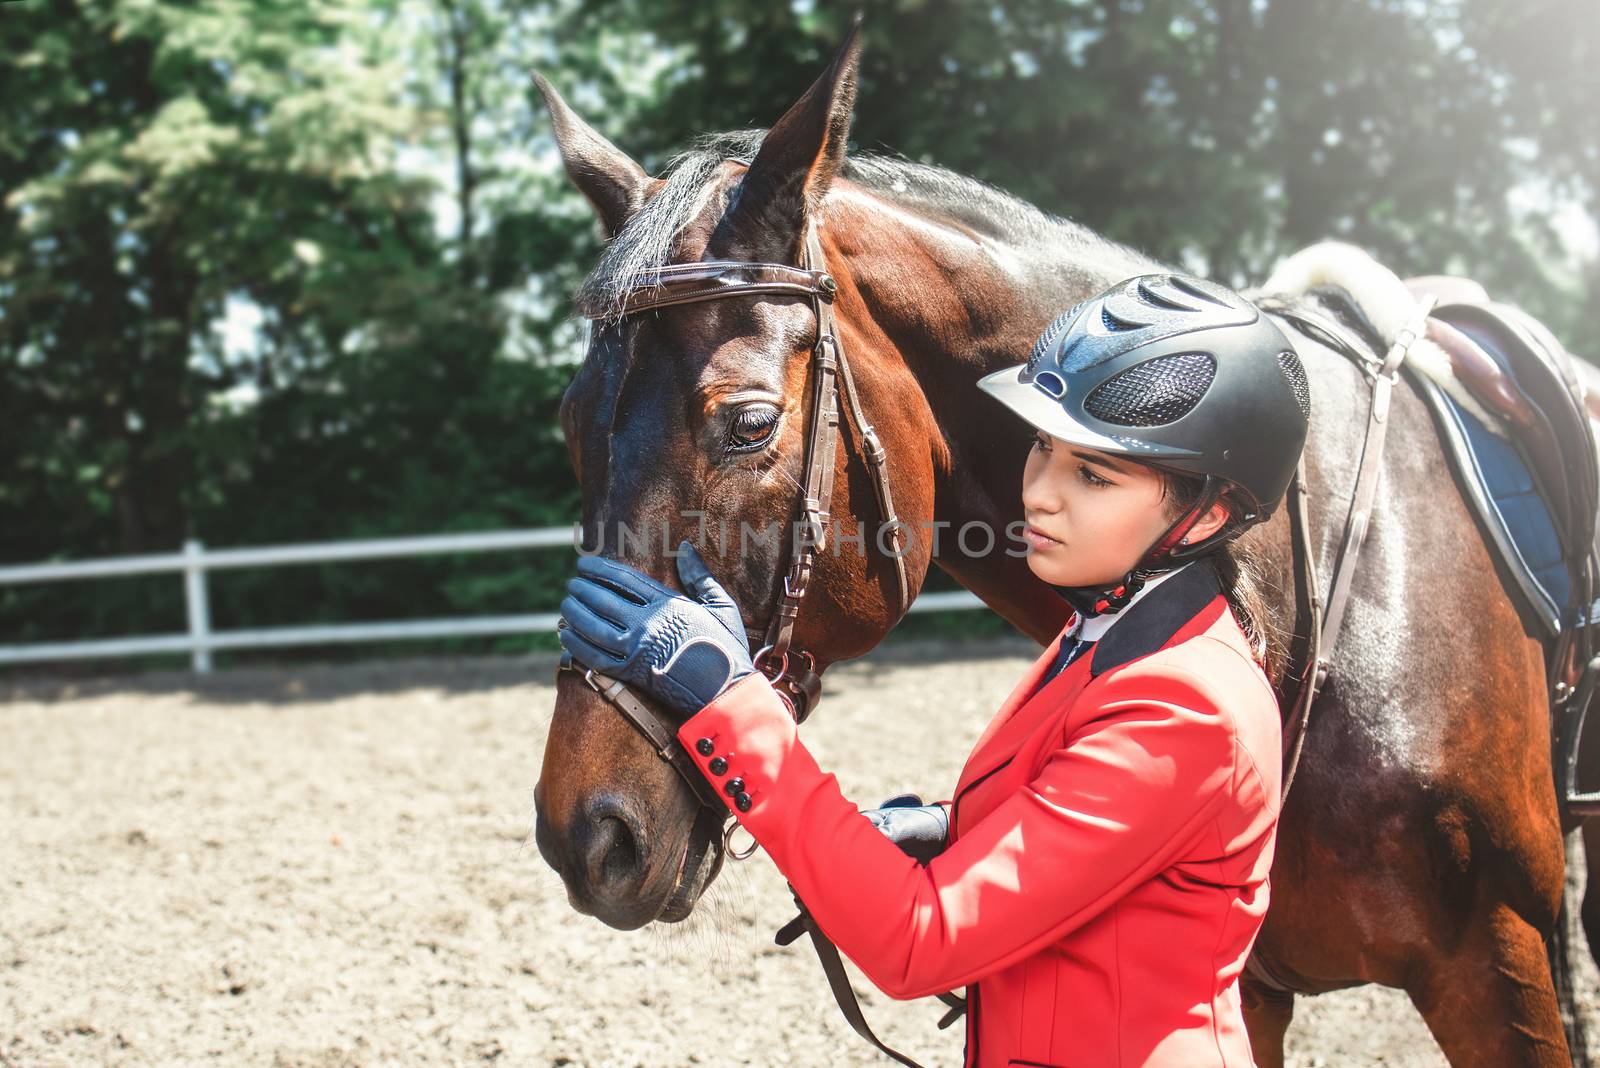 A young girl talking and takes care of her horse. She loves the animals and joyfully spends her time in their environment.